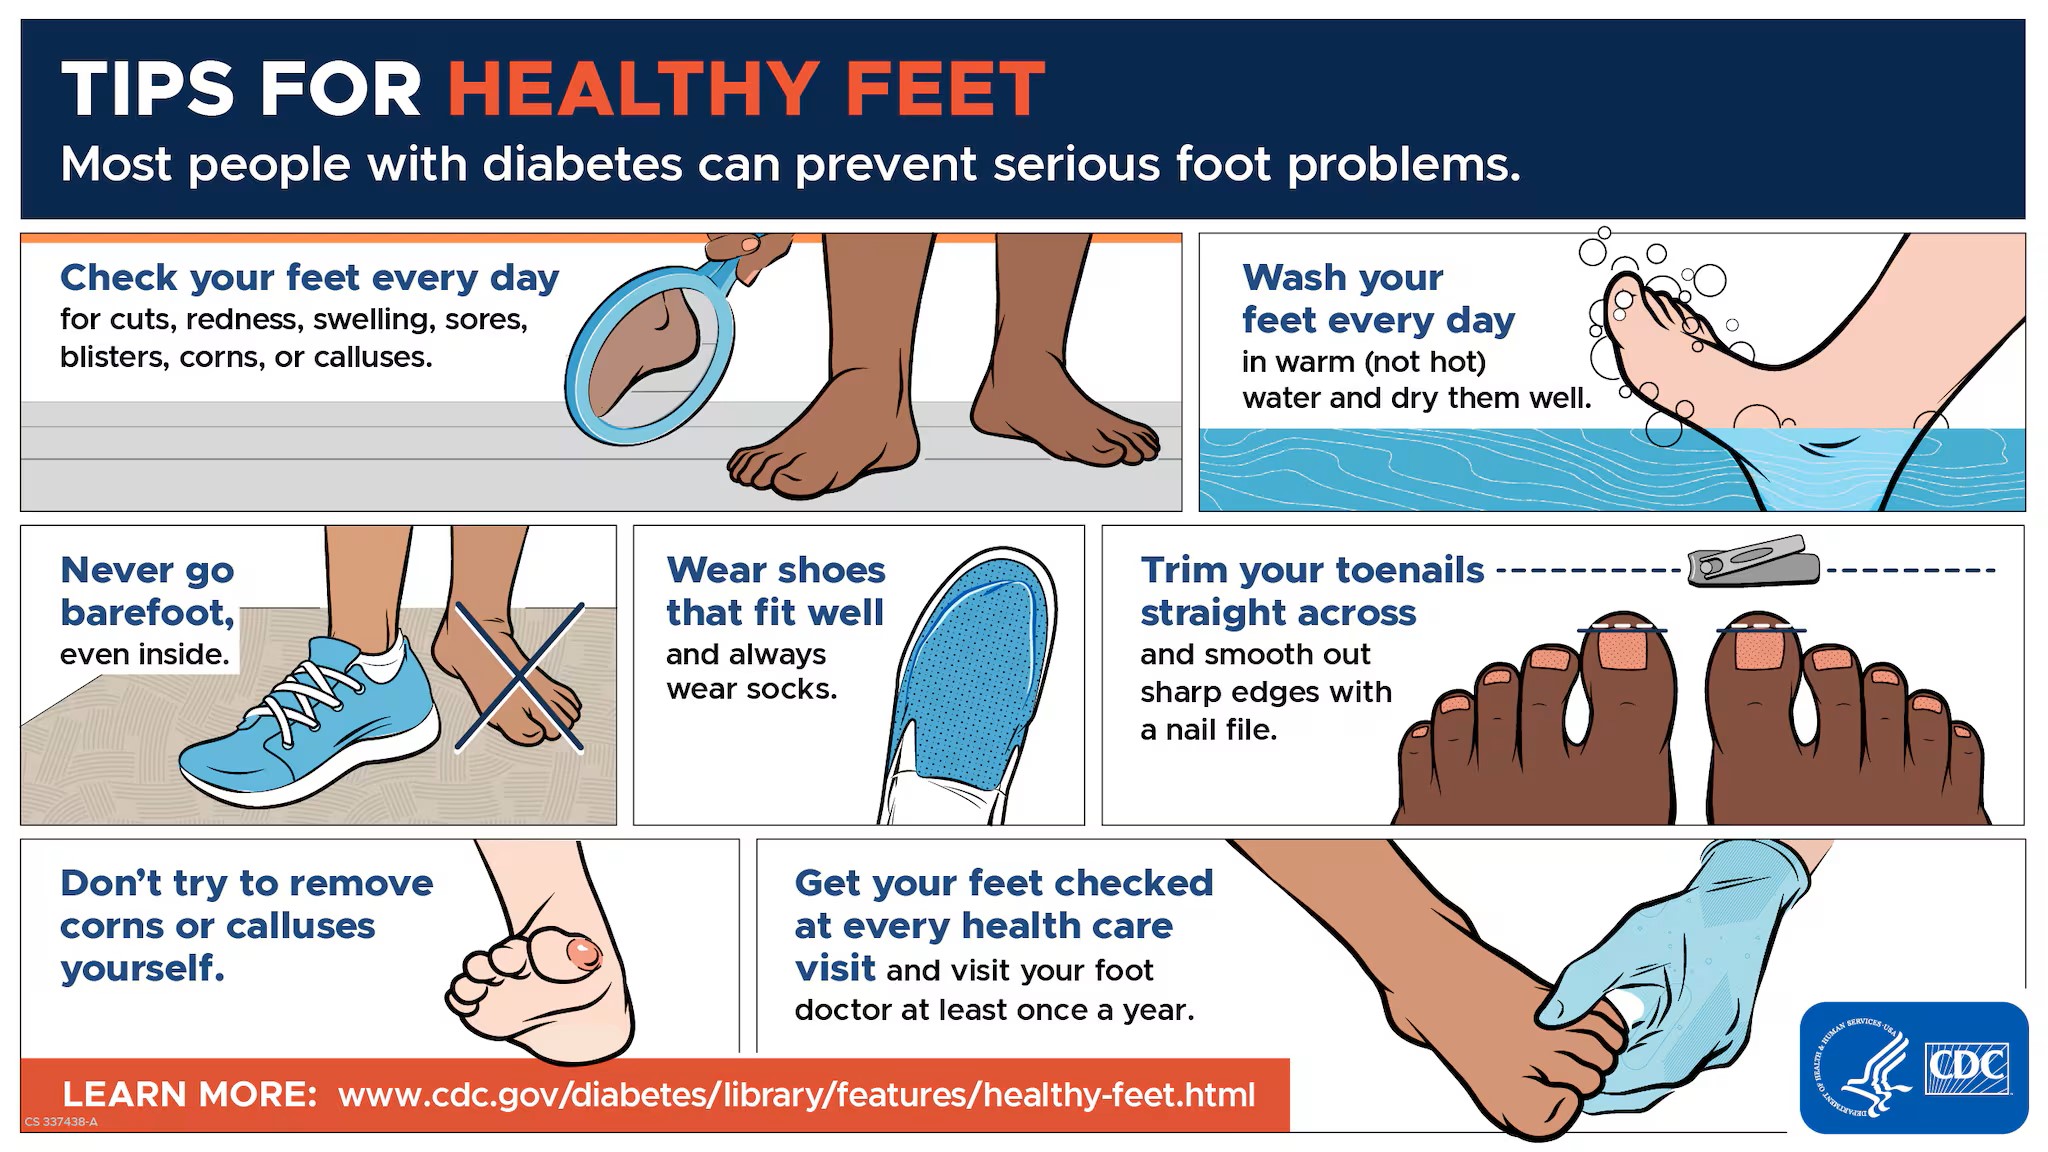 Infographic showing Tips for Healthy Feet